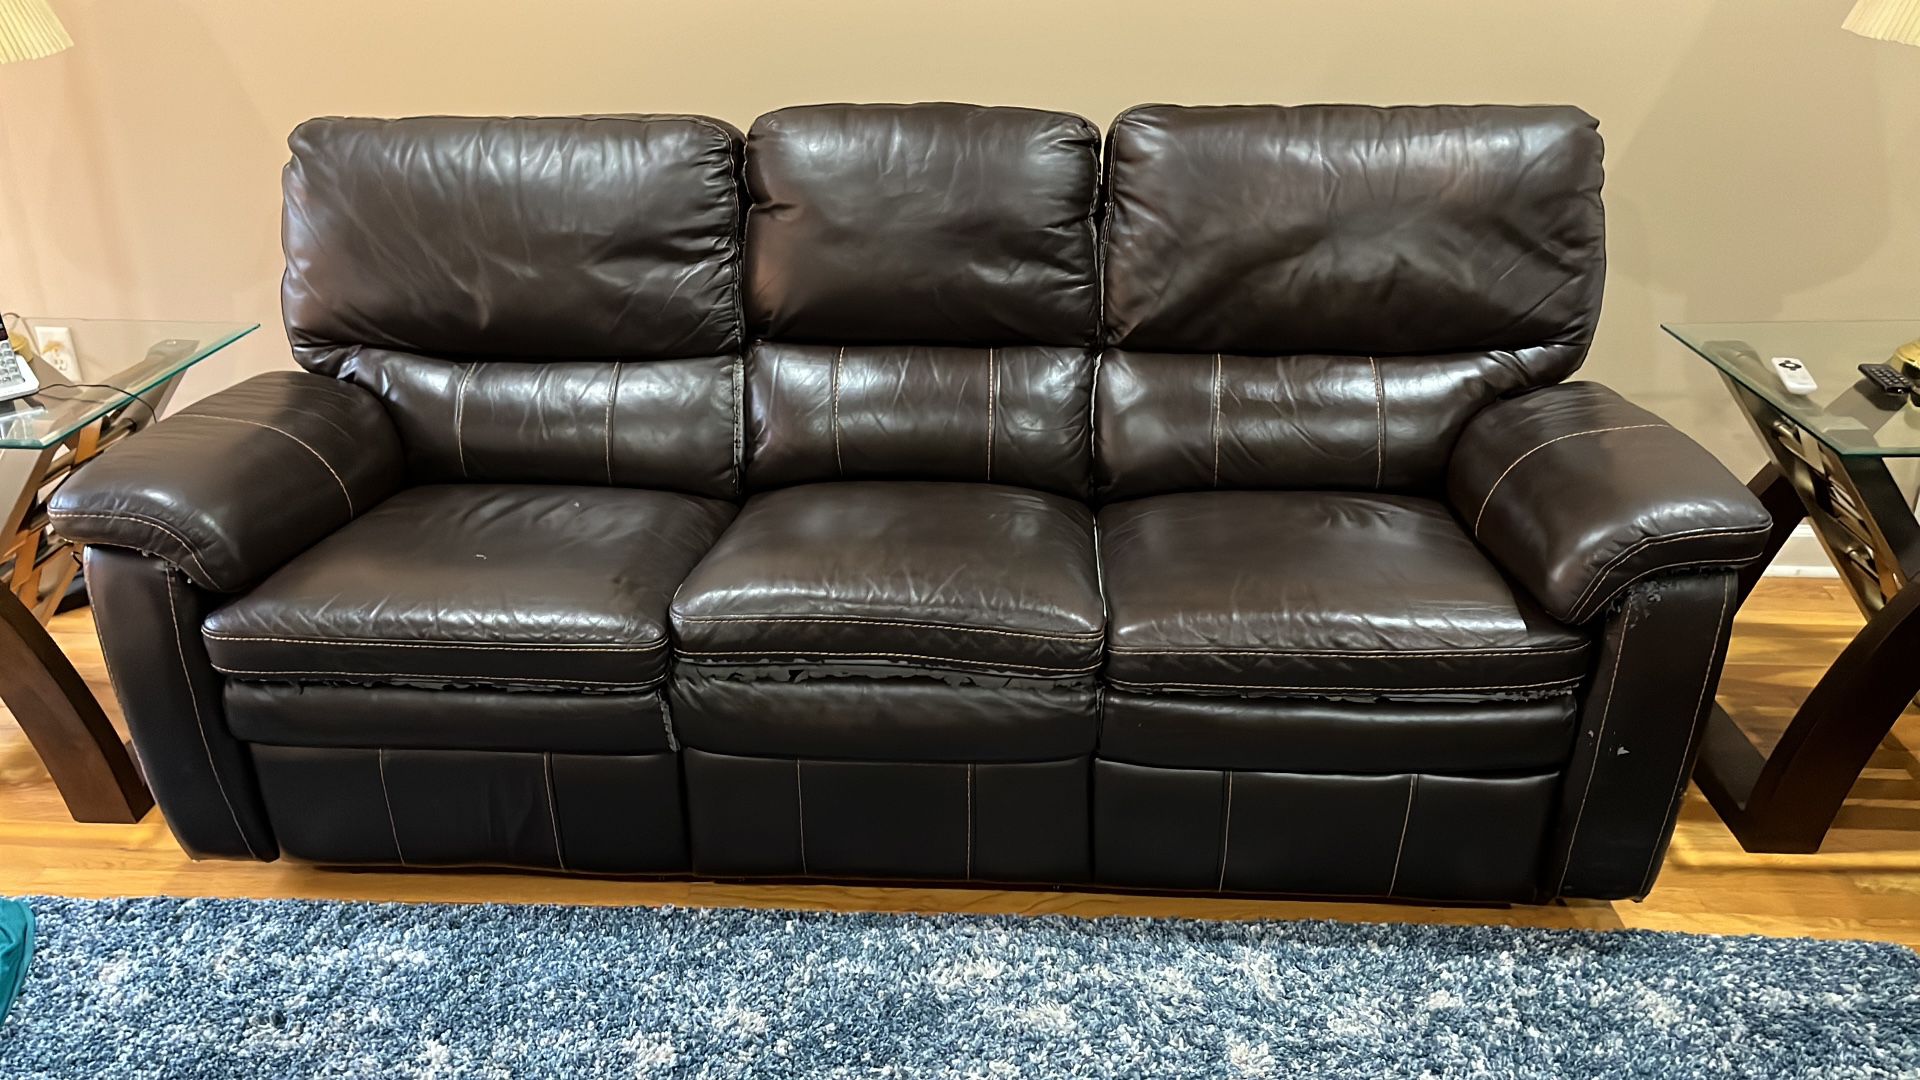 Comfortable Reclining Leather Couch